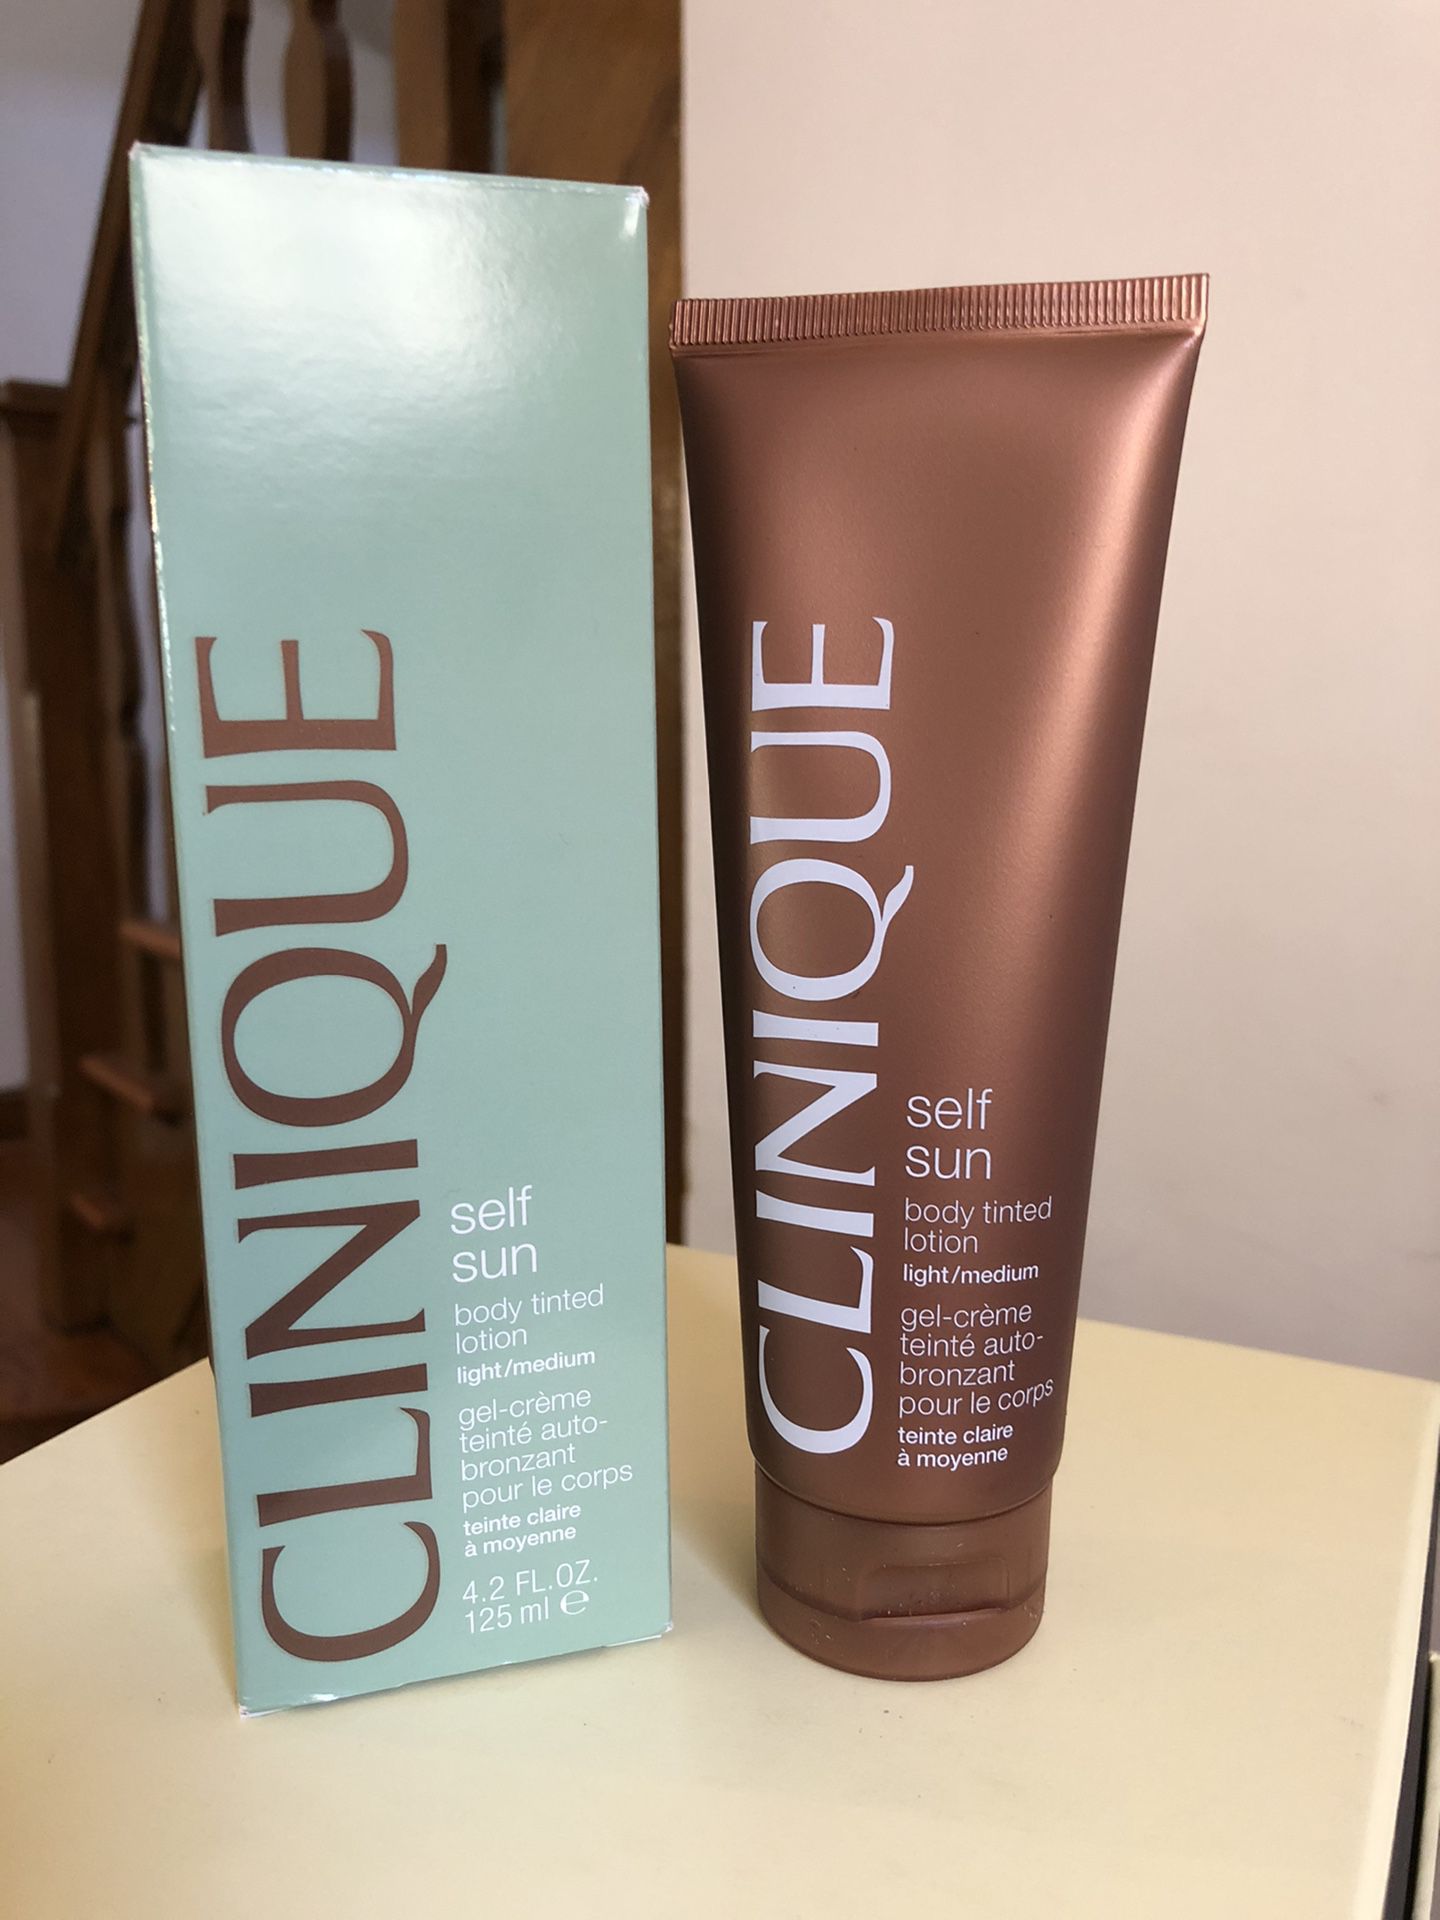 Clinique self sun body tinted lotion